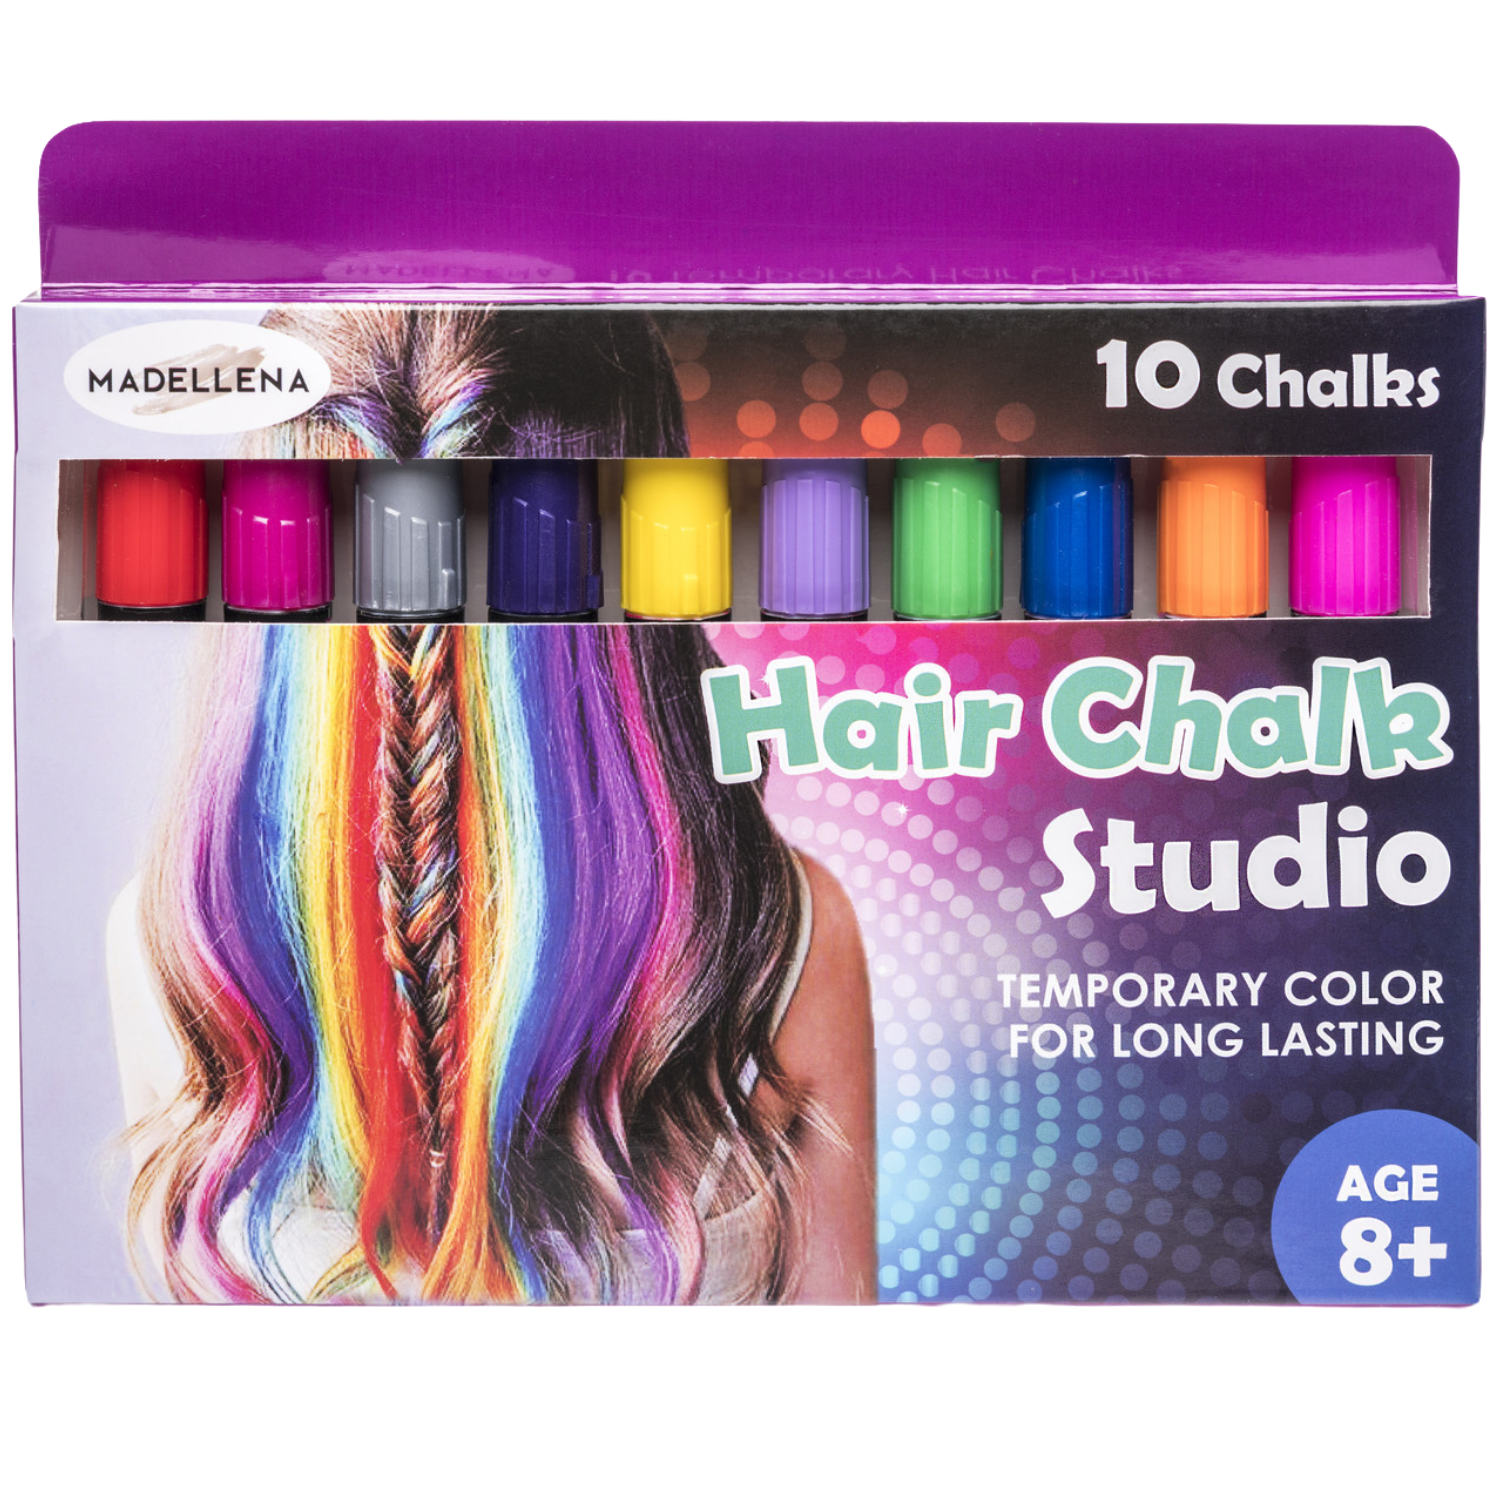 Hair Chalk For Kids - Hair Chalk for Girls - 10 Piece Temporary Hair Chalks  - Birthday Gifts For Girls - Hair Chalk - Kids Hair Dye - Hair Chalk Set,  Gifts for Girls Ages 3, 4, 5, 6 ,7, 8, 9, 10 